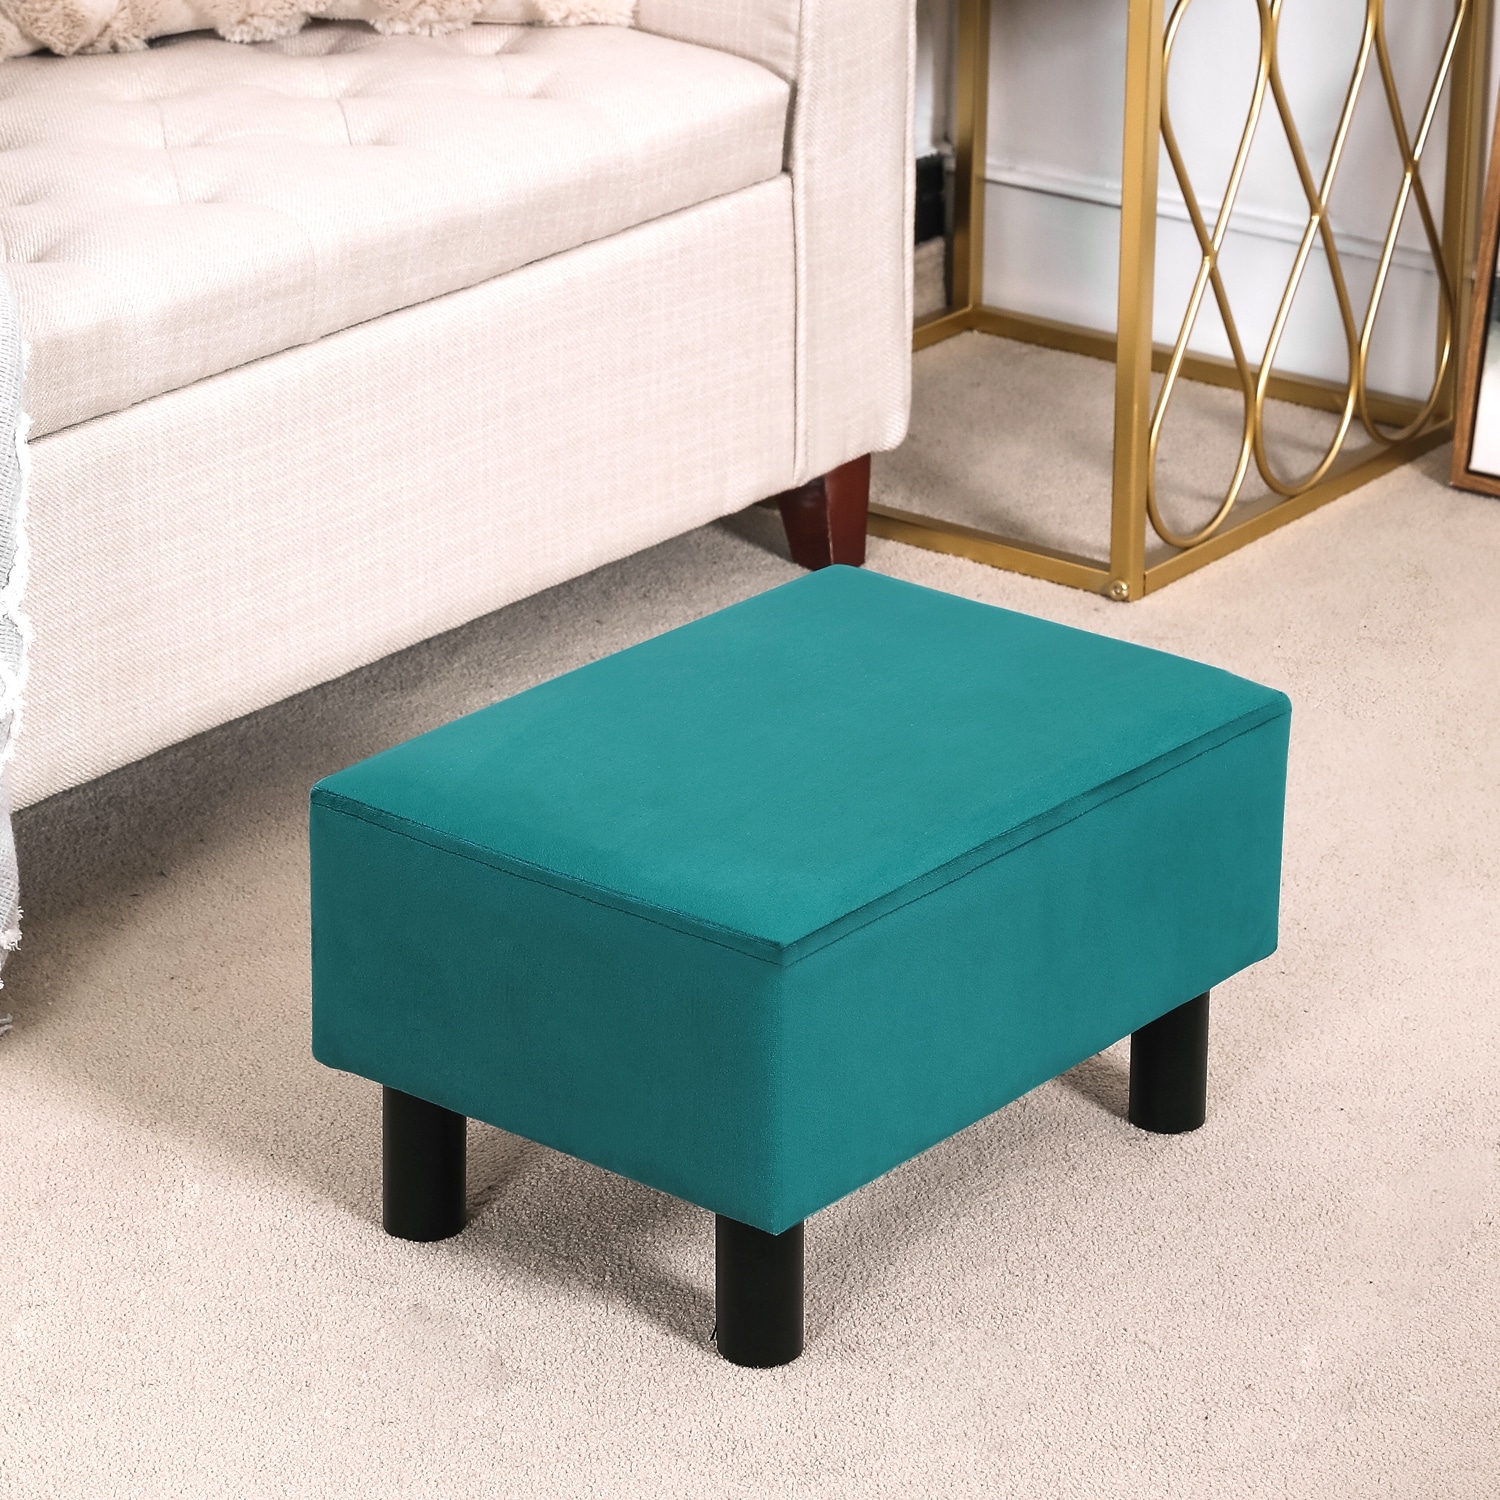 https://ak1.ostkcdn.com/images/products/is/images/direct/ccaf10f6fd72378f25e5c5459dda8bd91d5ee704/Adeco-Footstool-Ottoman-Faux-Leather-Foot-Rest-Stool.jpg